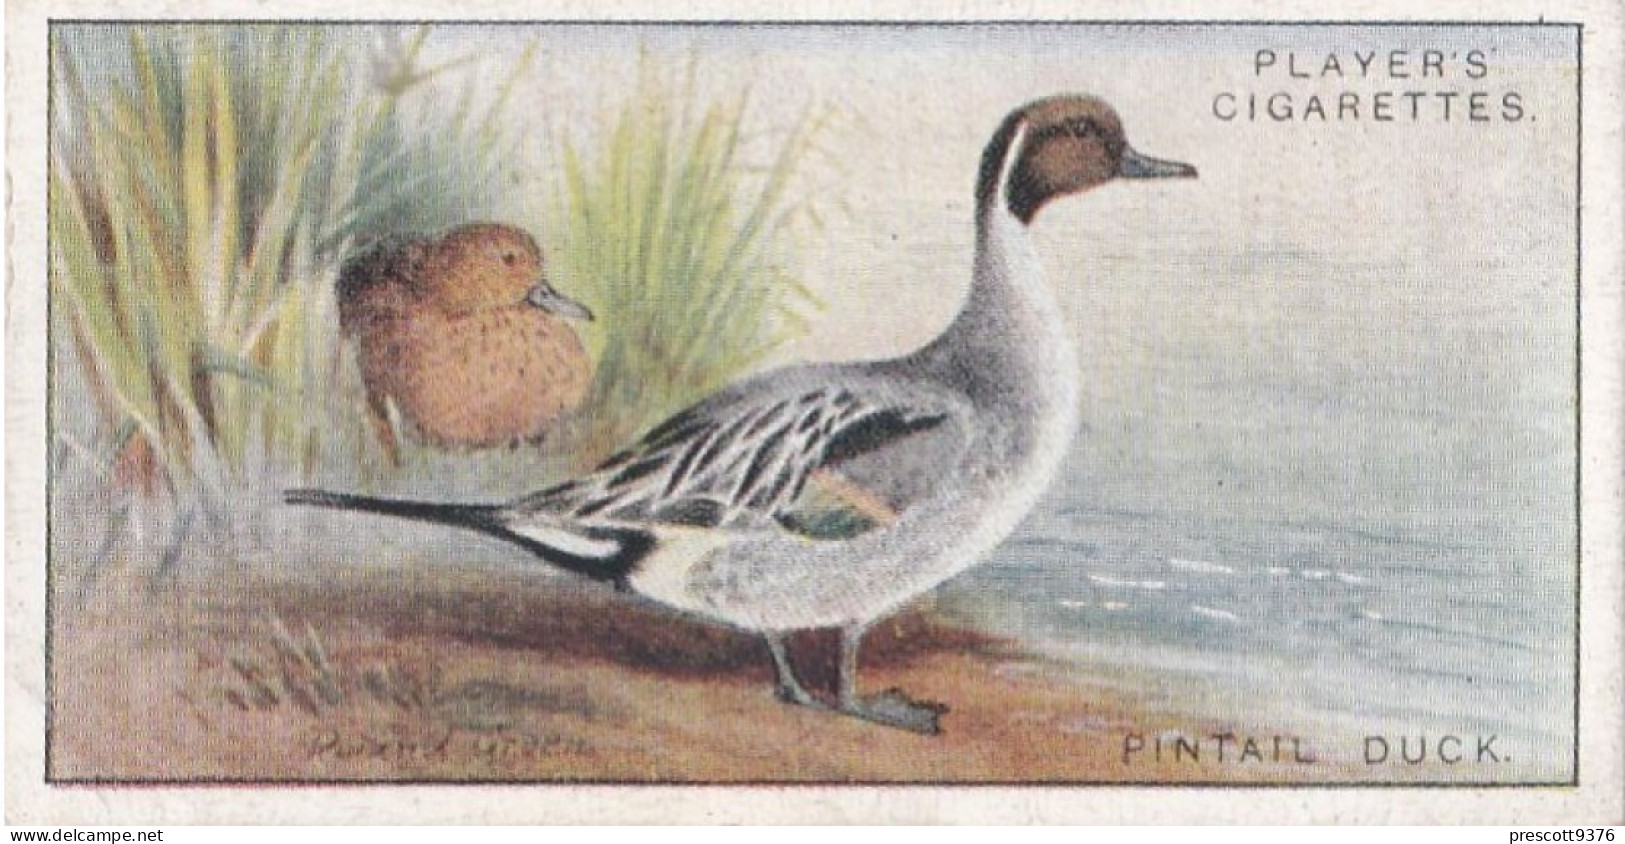 6 Pintail Duck  - Game Birds & Wildfowl 1927  - Players Cigarette Card - Original - Player's